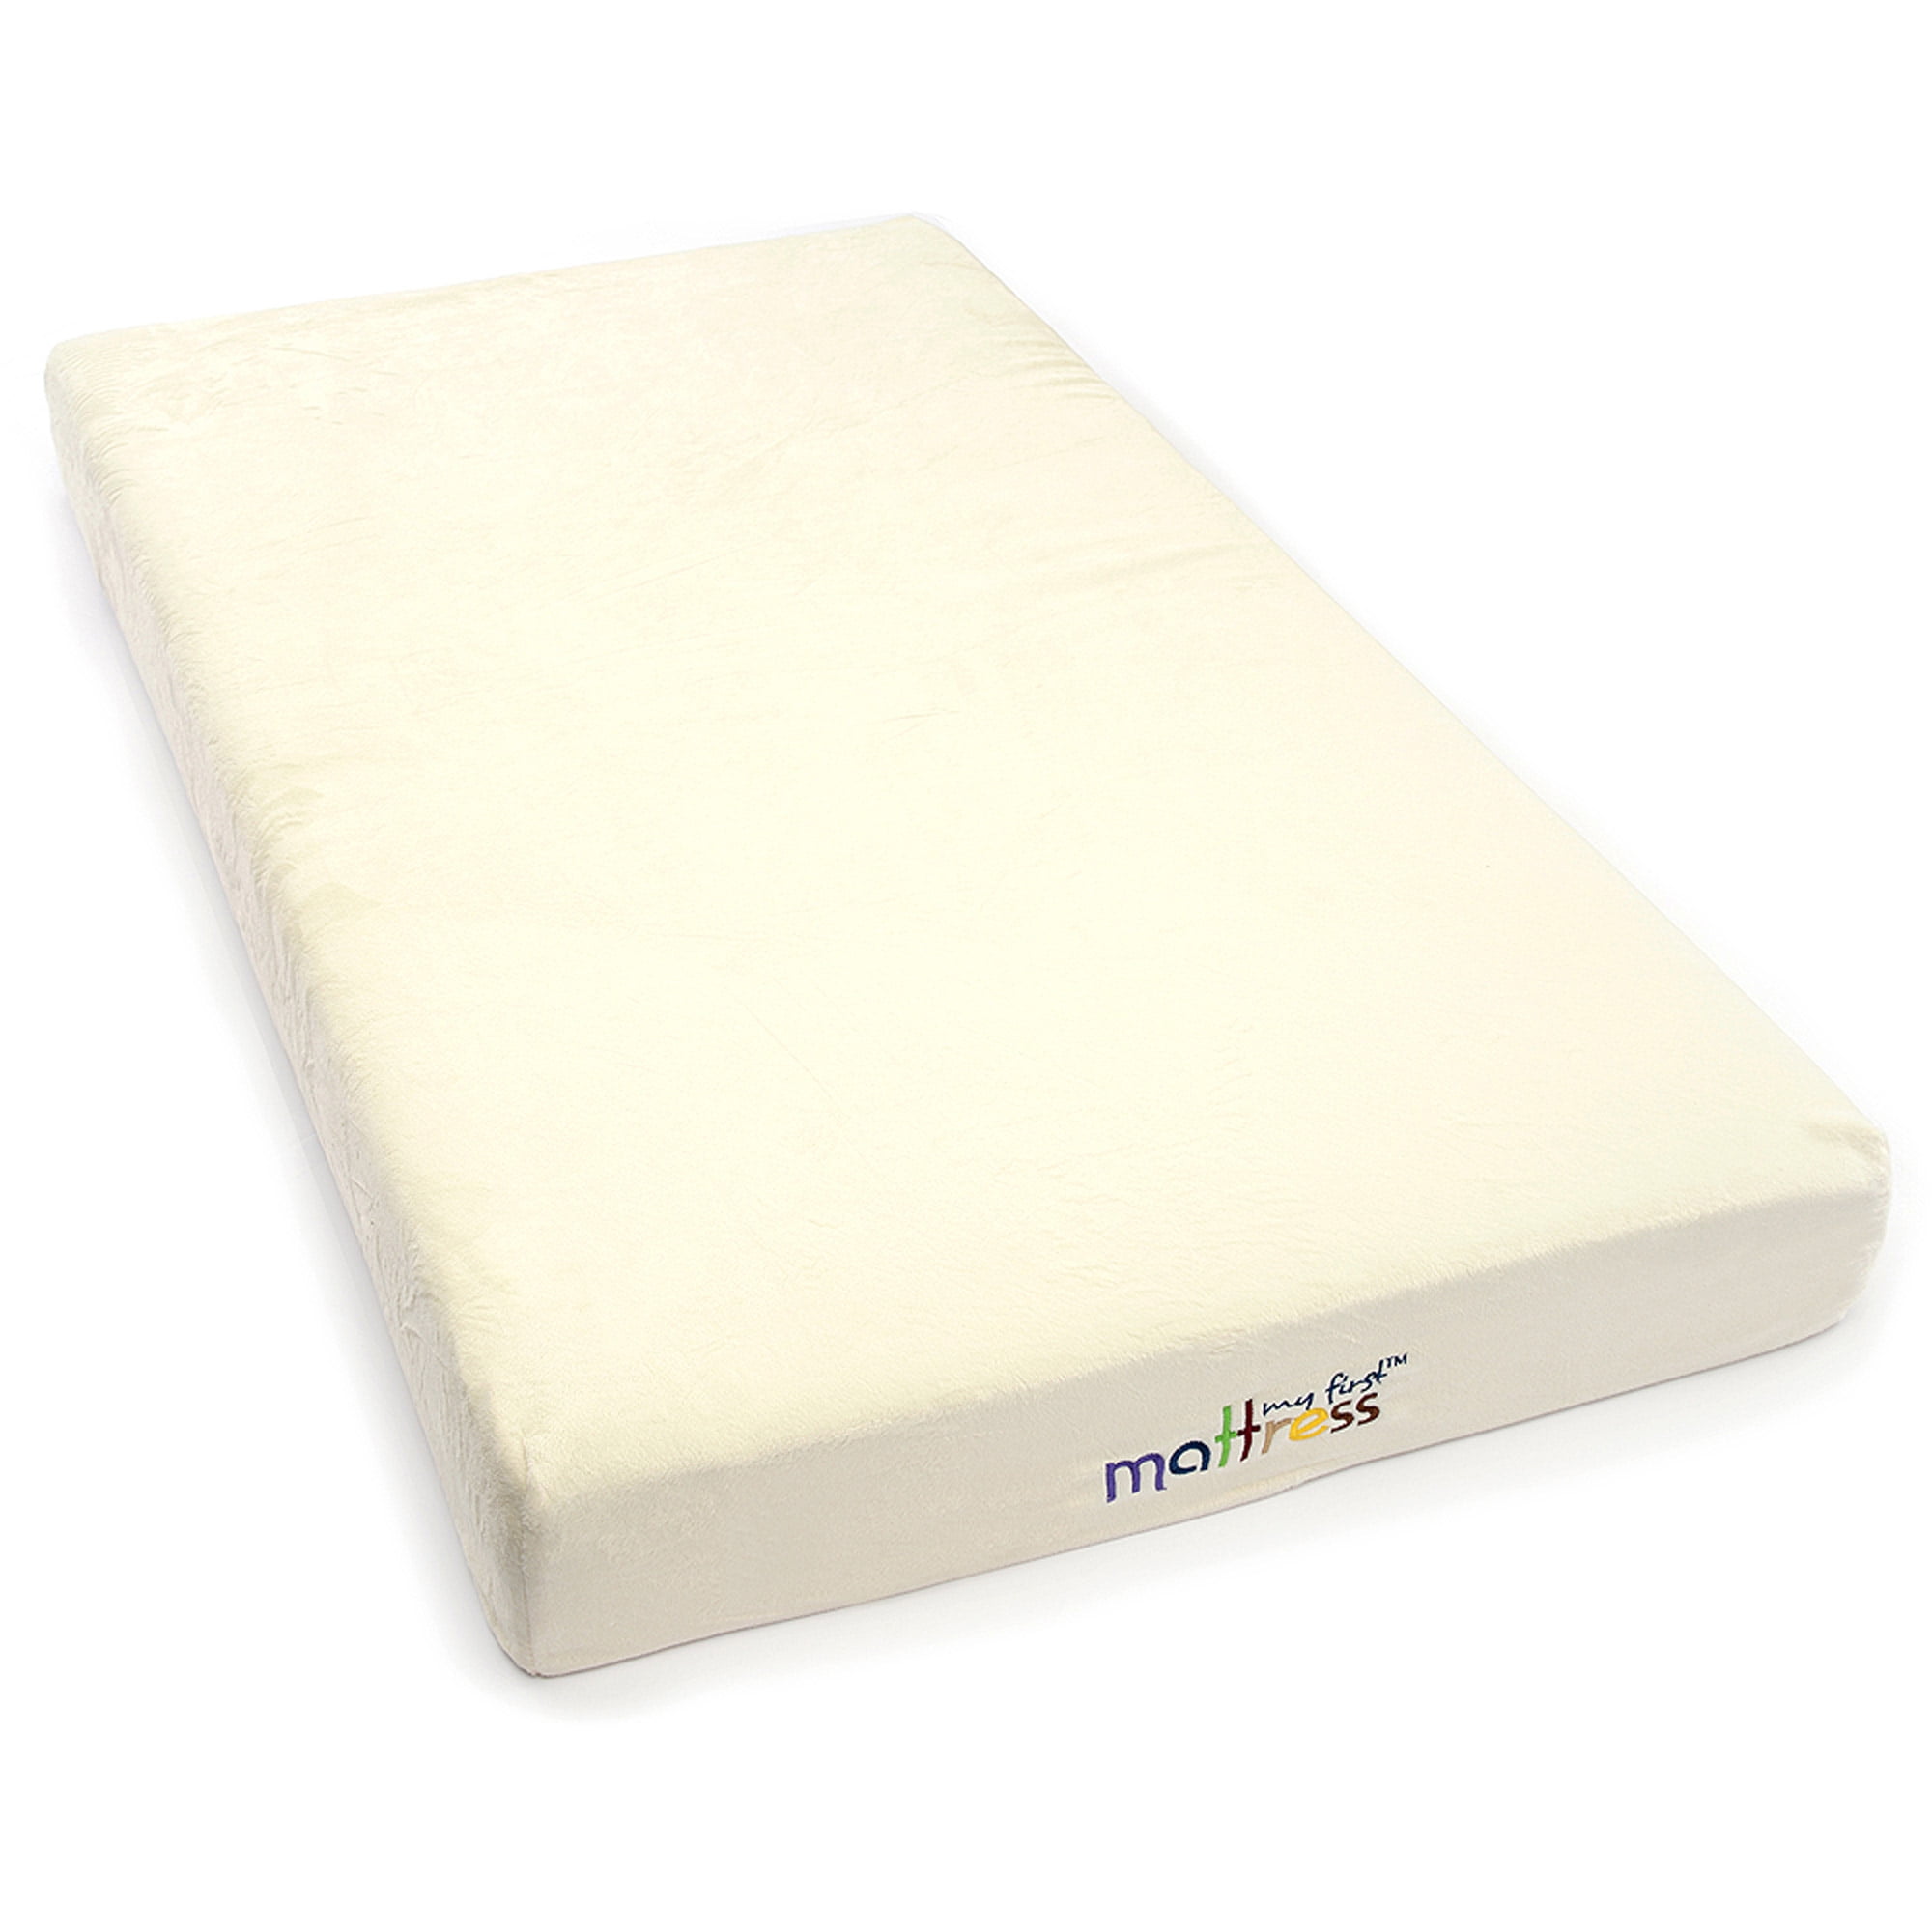 Classic Quilted Cover Ultra Thick Fits Most Graco/M&P Cot Mattress New Baby Travel Cot Mattress/Foam 95 x 65 x 5 cm Eco-Breathable Hypoallergenic Waterproof Nursery Bed Foam Furniture